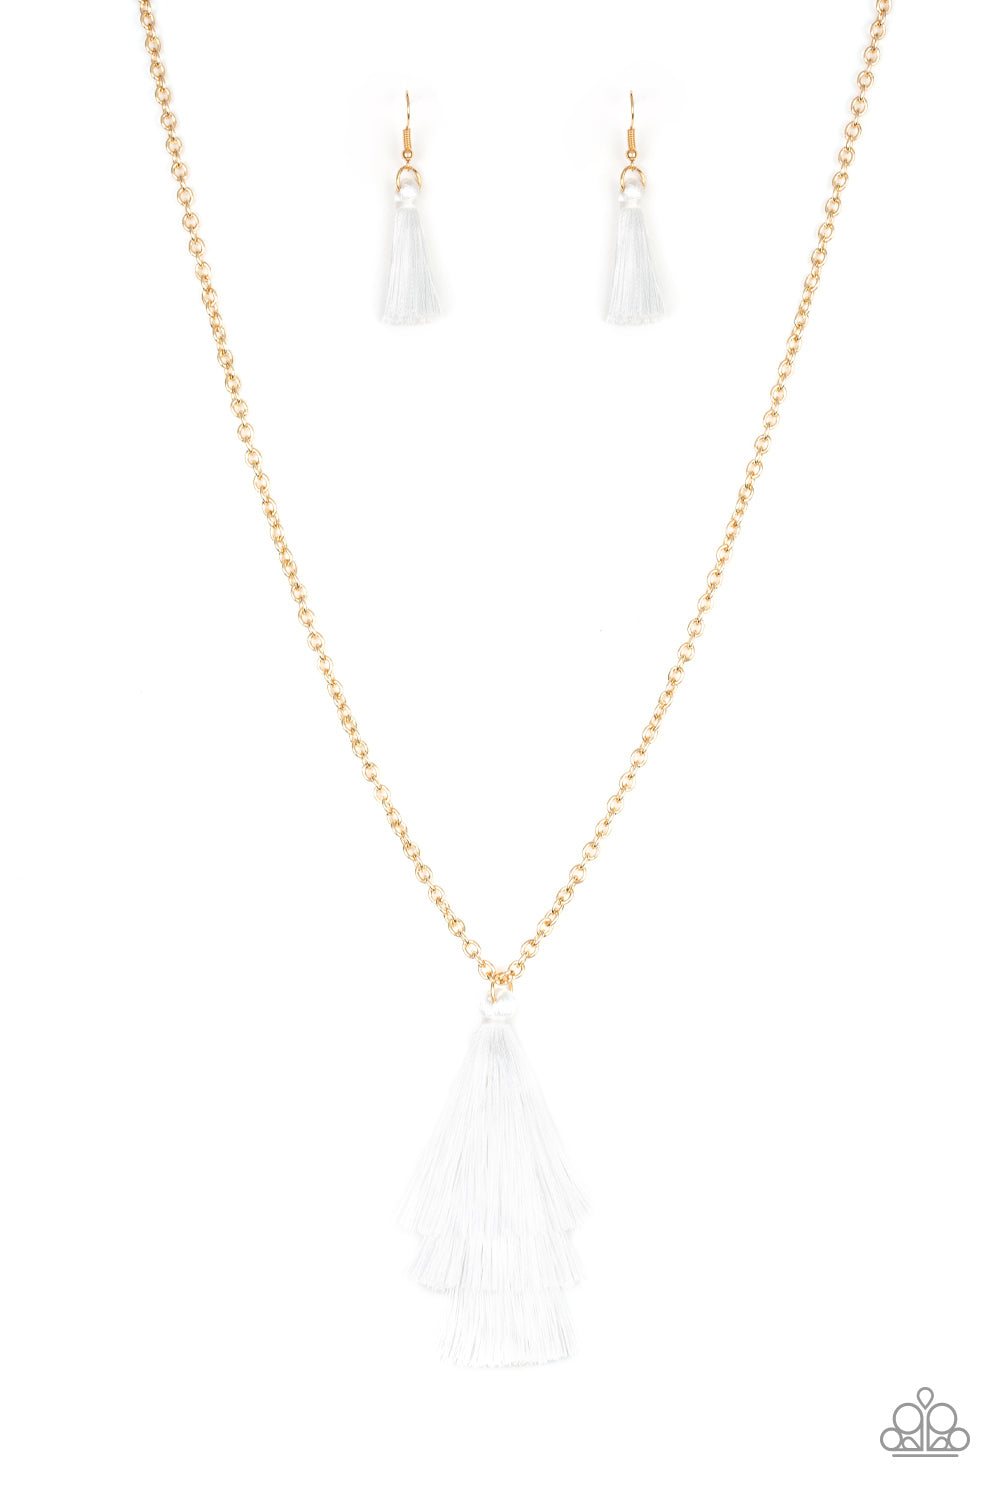 TRIPLE THE TASSEL - WHITE NECKLACE